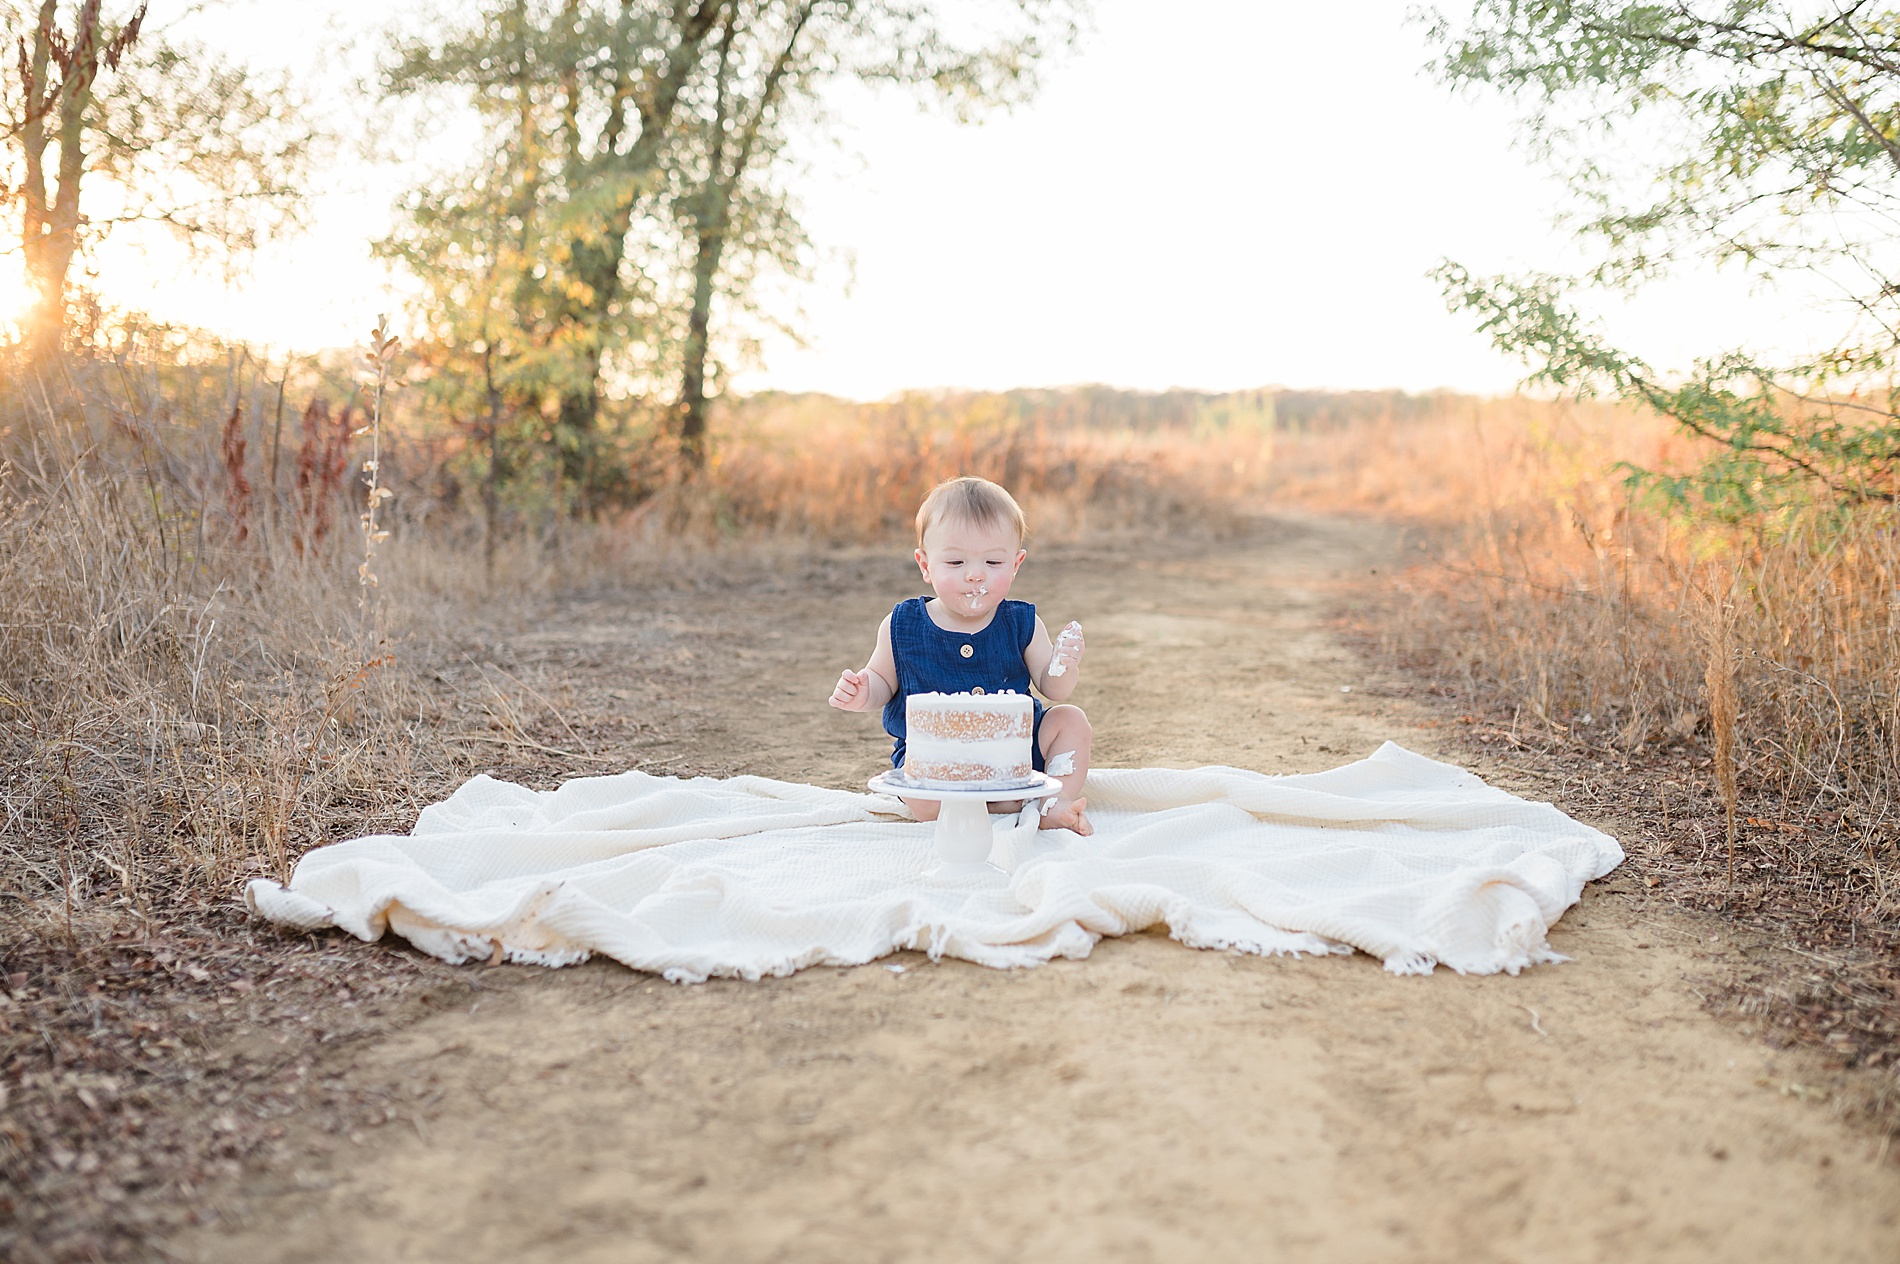 outdoor cake smash from 1 year milestone session photographed by Lindsey Dutton Photography, a Dallas newborn photographer
